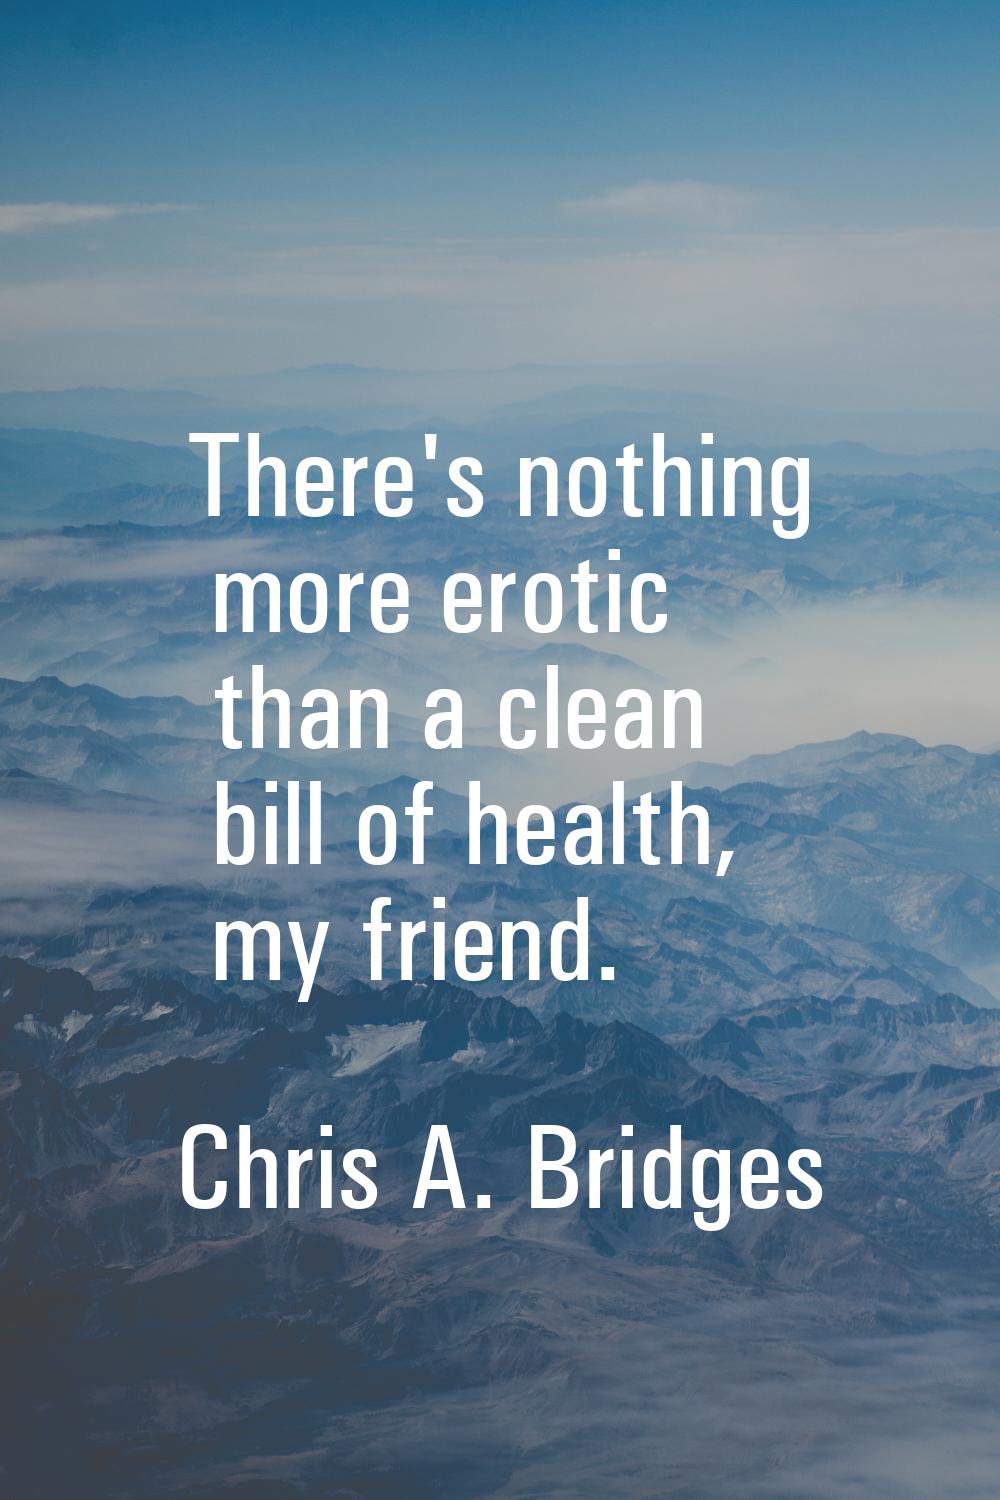 There's nothing more erotic than a clean bill of health, my friend.